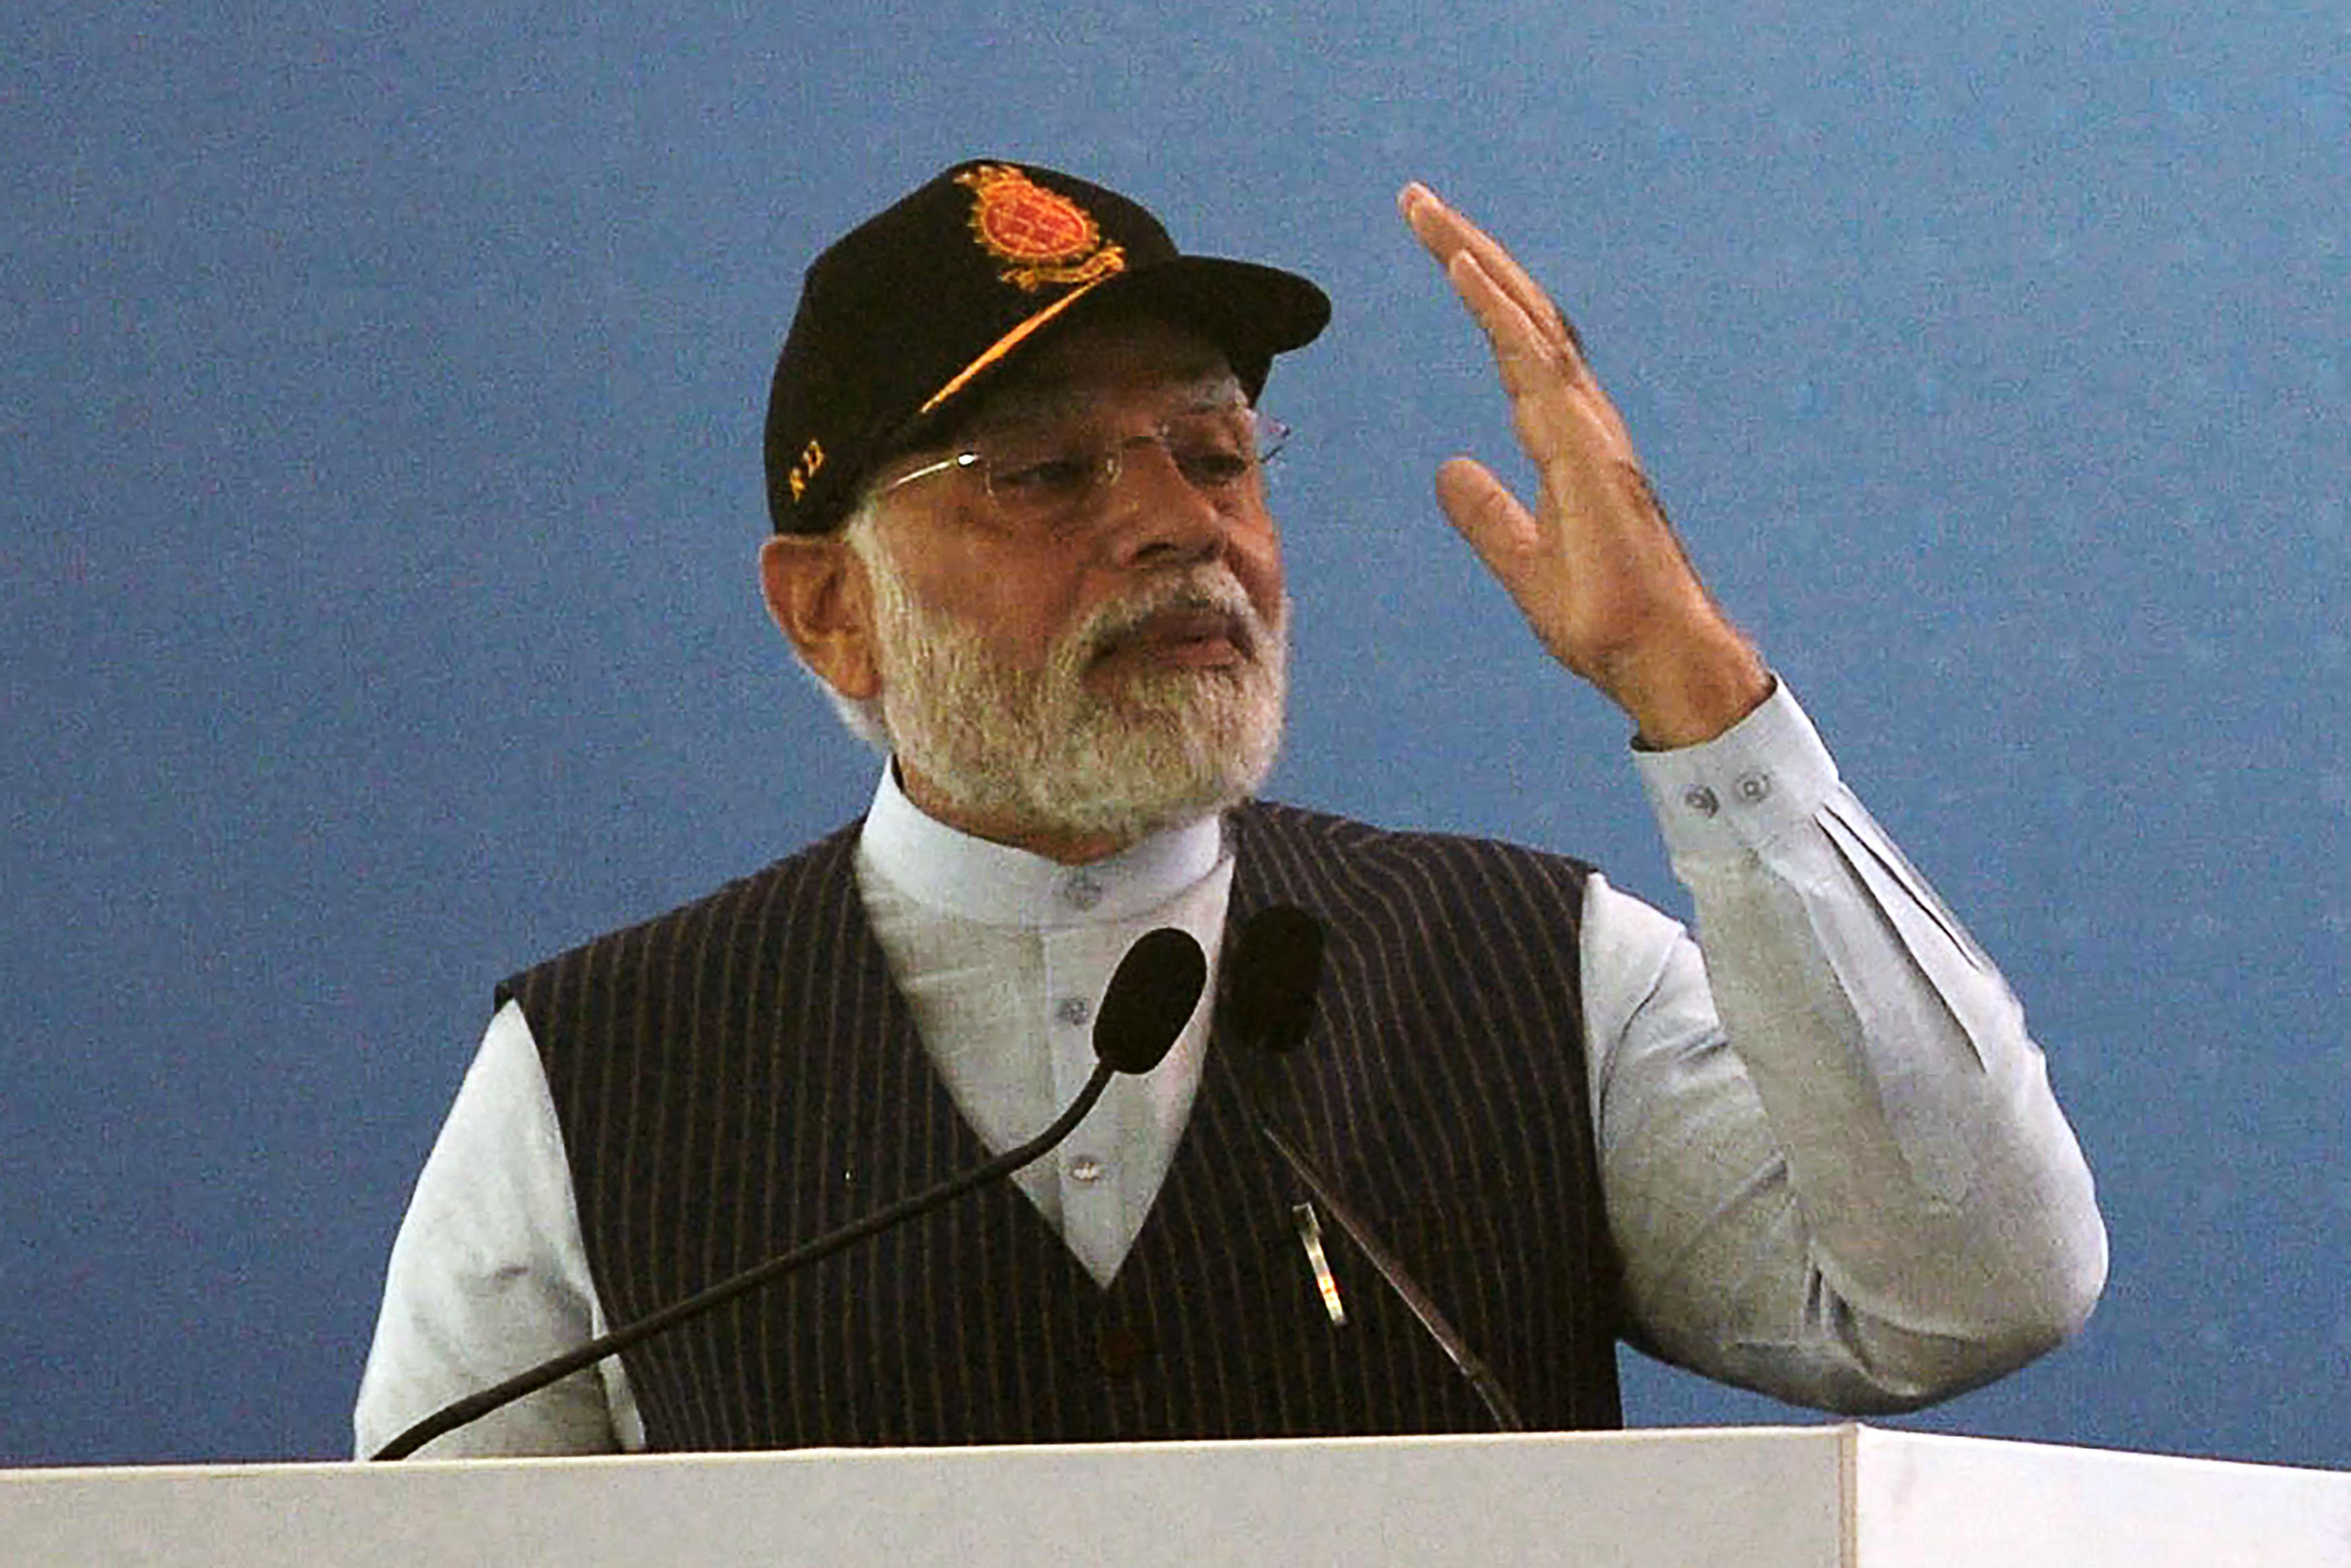 A man in a vest and baseball cap gestures with his arm as he speaks at a lectern.